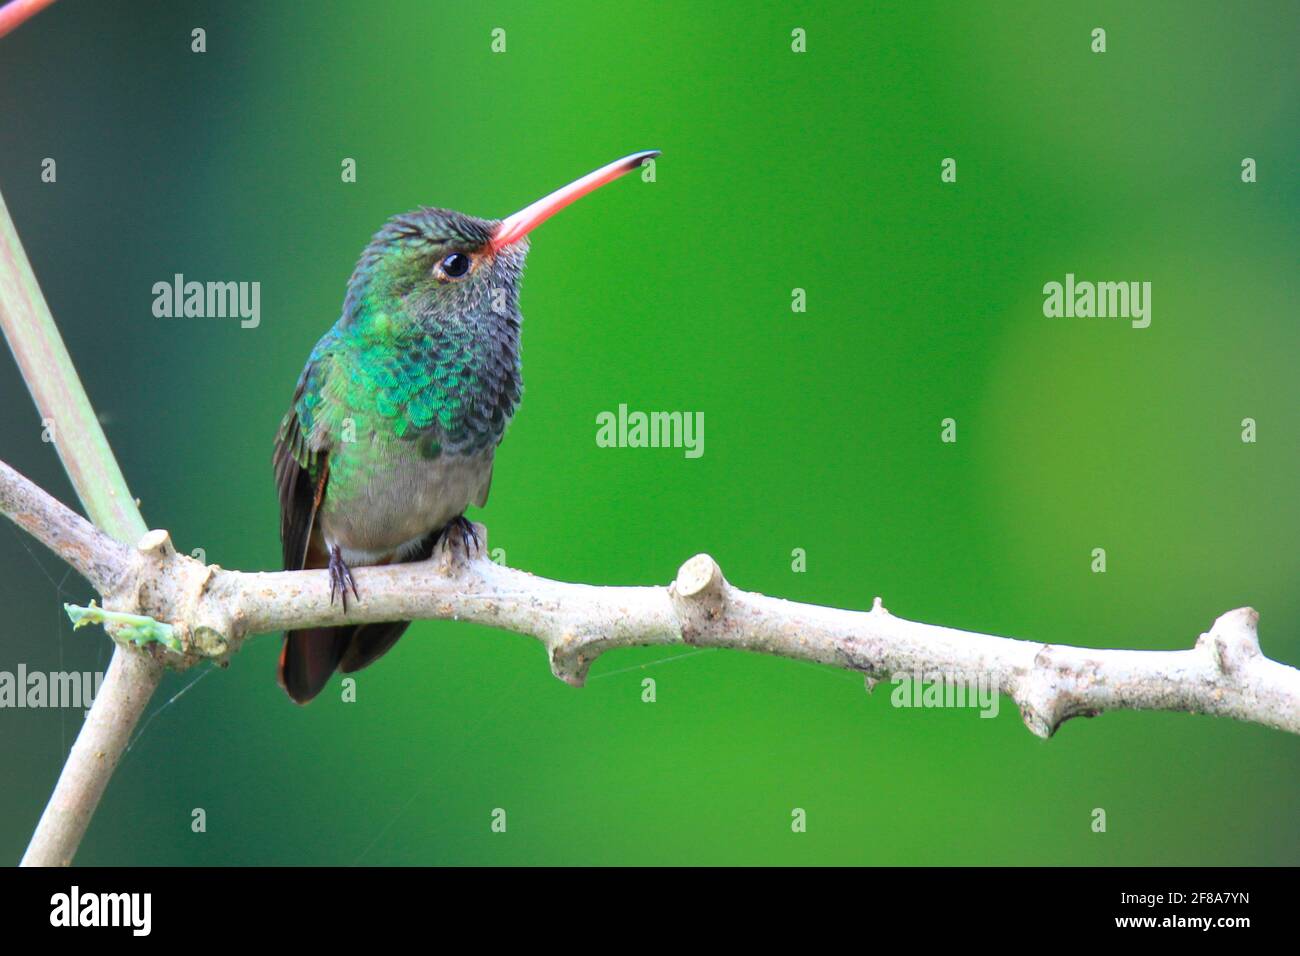 Rufous-tailed emerald hummingbird perched on a branch in Mindo, Ecuador, South America with green background Stock Photo